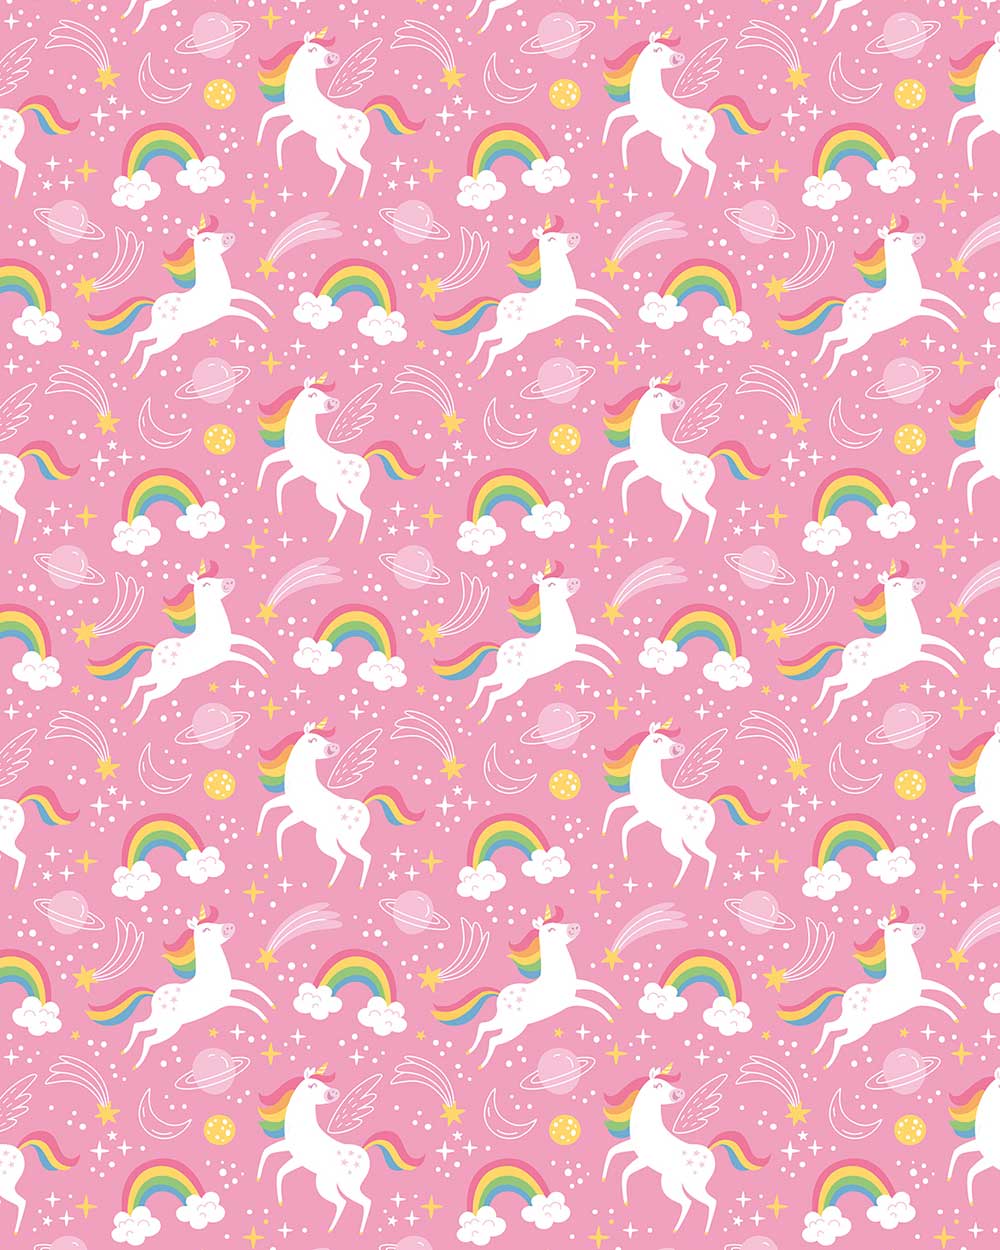 Unicorn pink gift wrapping paper sticker tags 